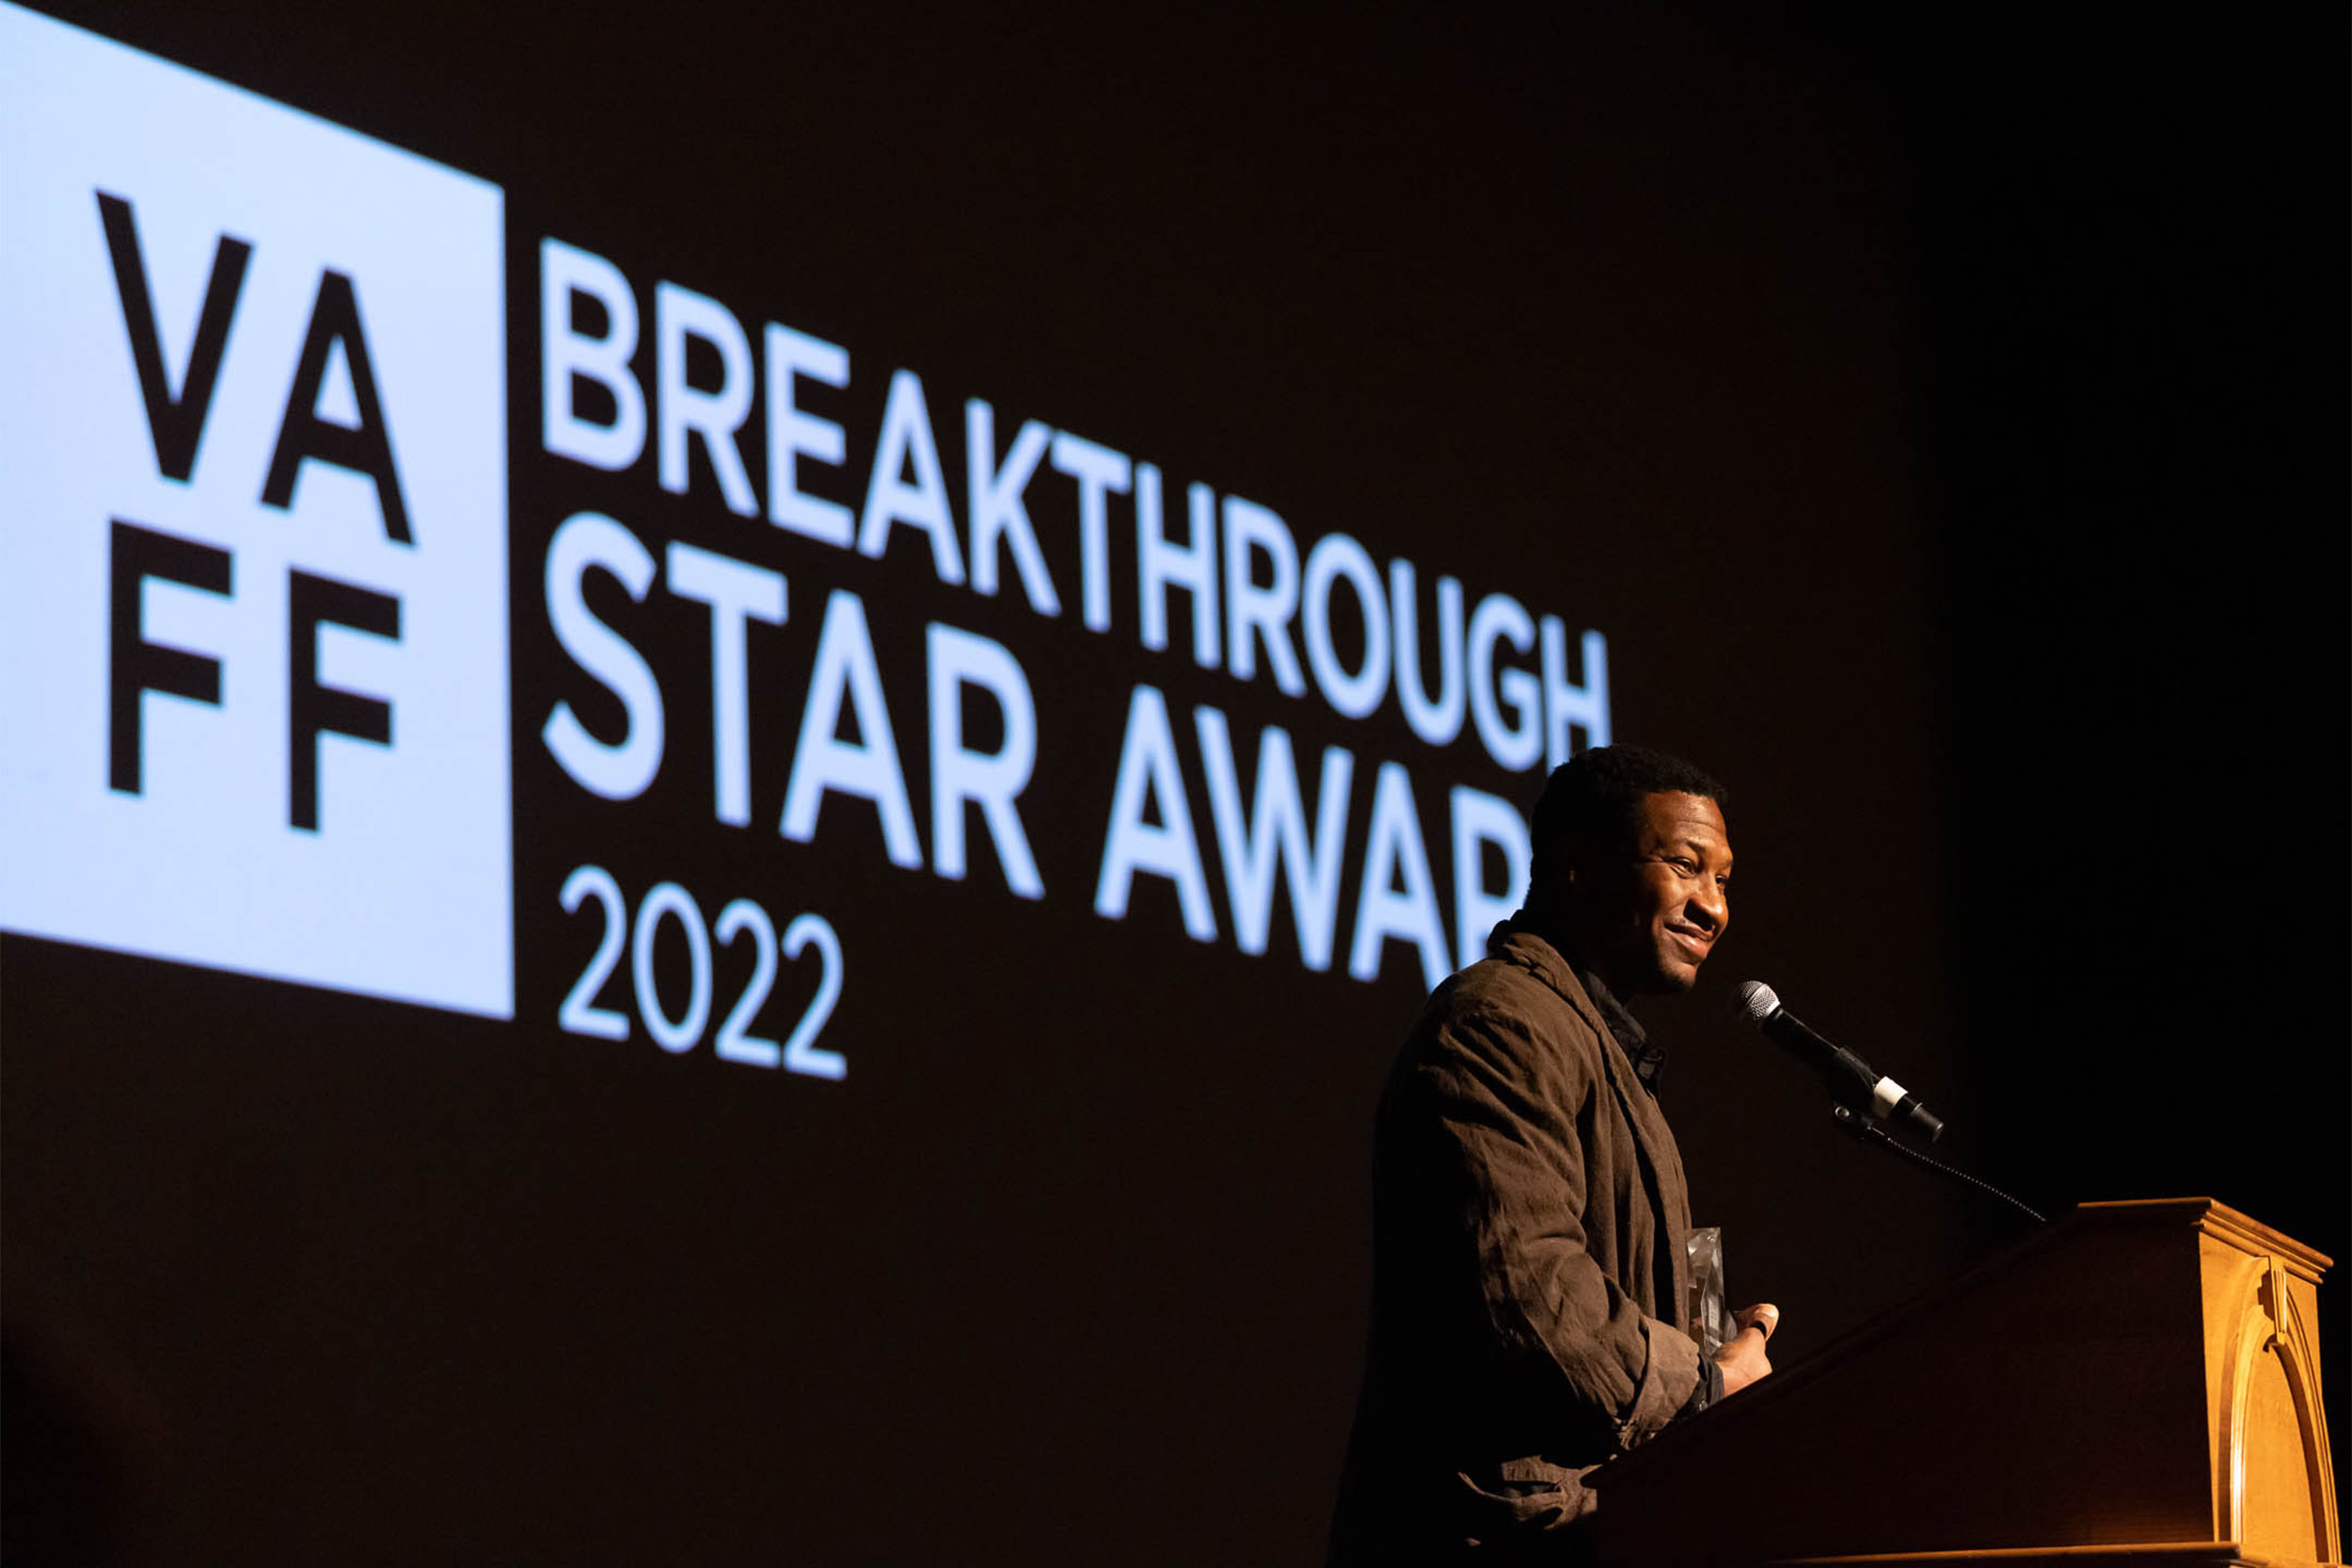 Man speaking from a podium presenting the Breakthrough Star Award for 2022 at the Virginia Film Festival